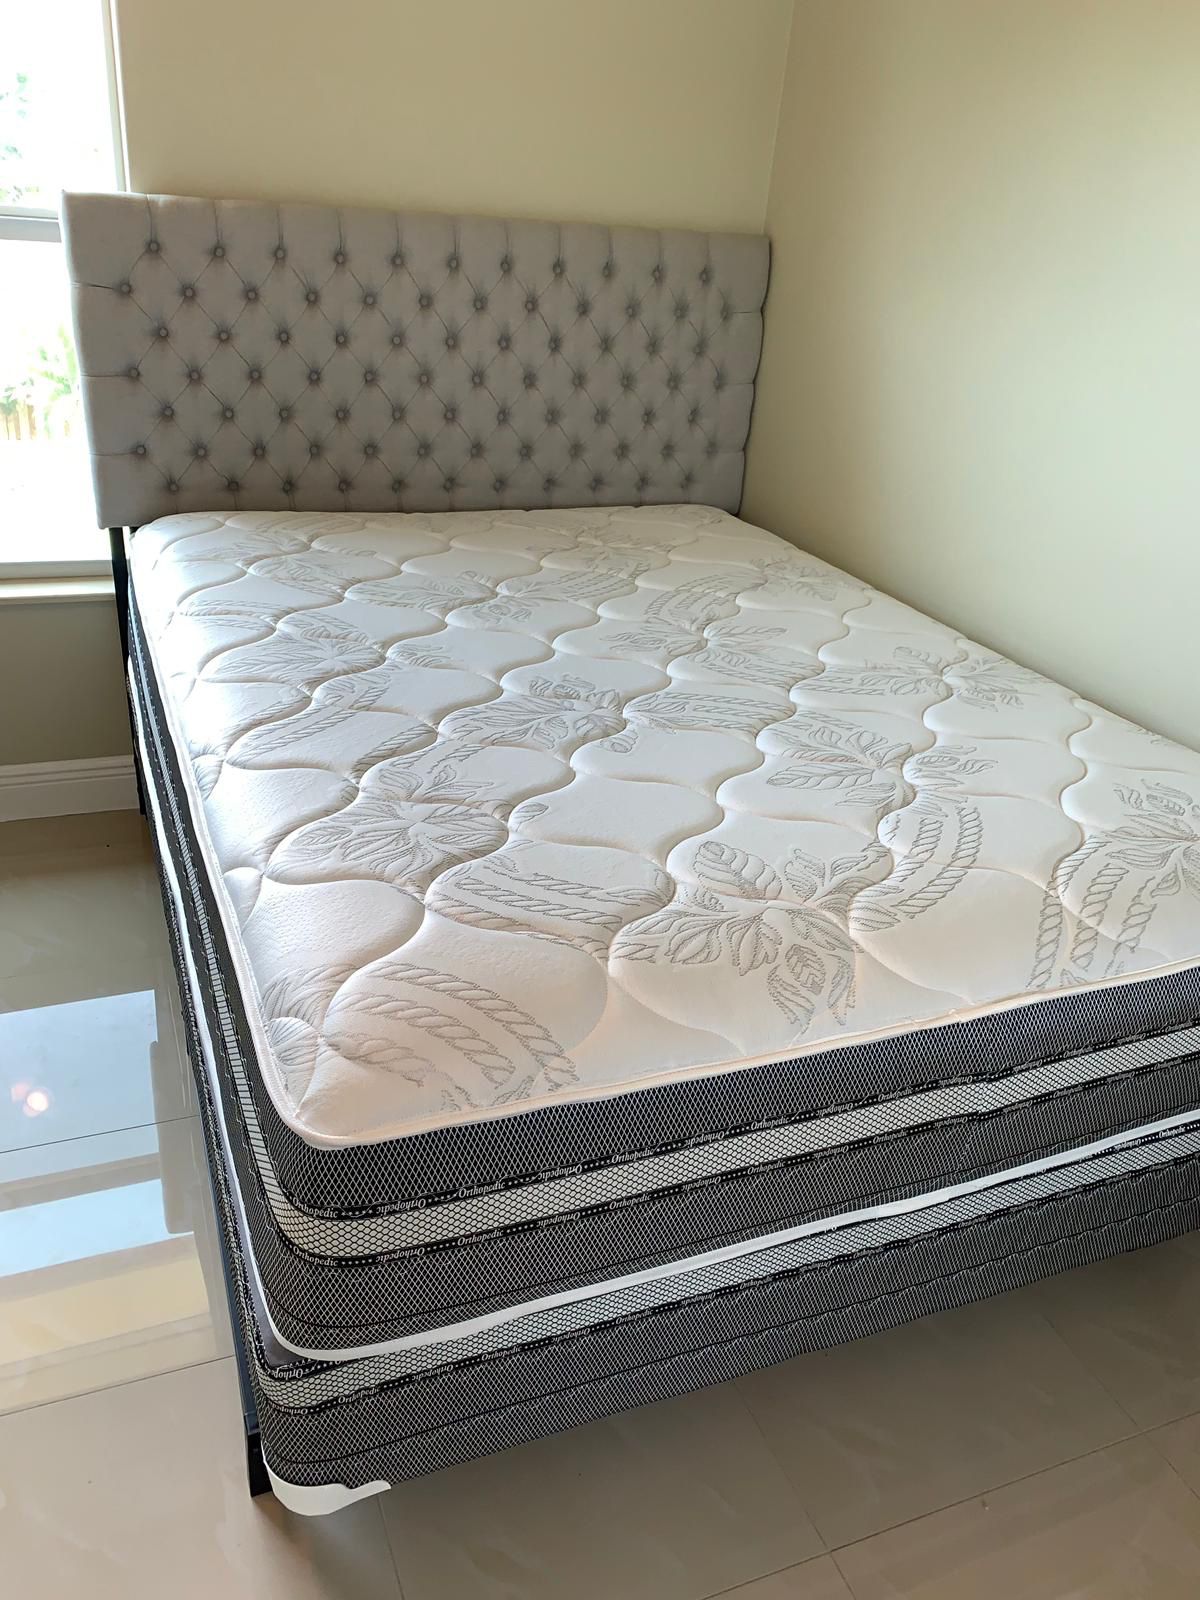 memory foam mattresses and box springs FREE DELIVERY 🚚 Full 220$ queen 230$ king 260$... bed frame not included